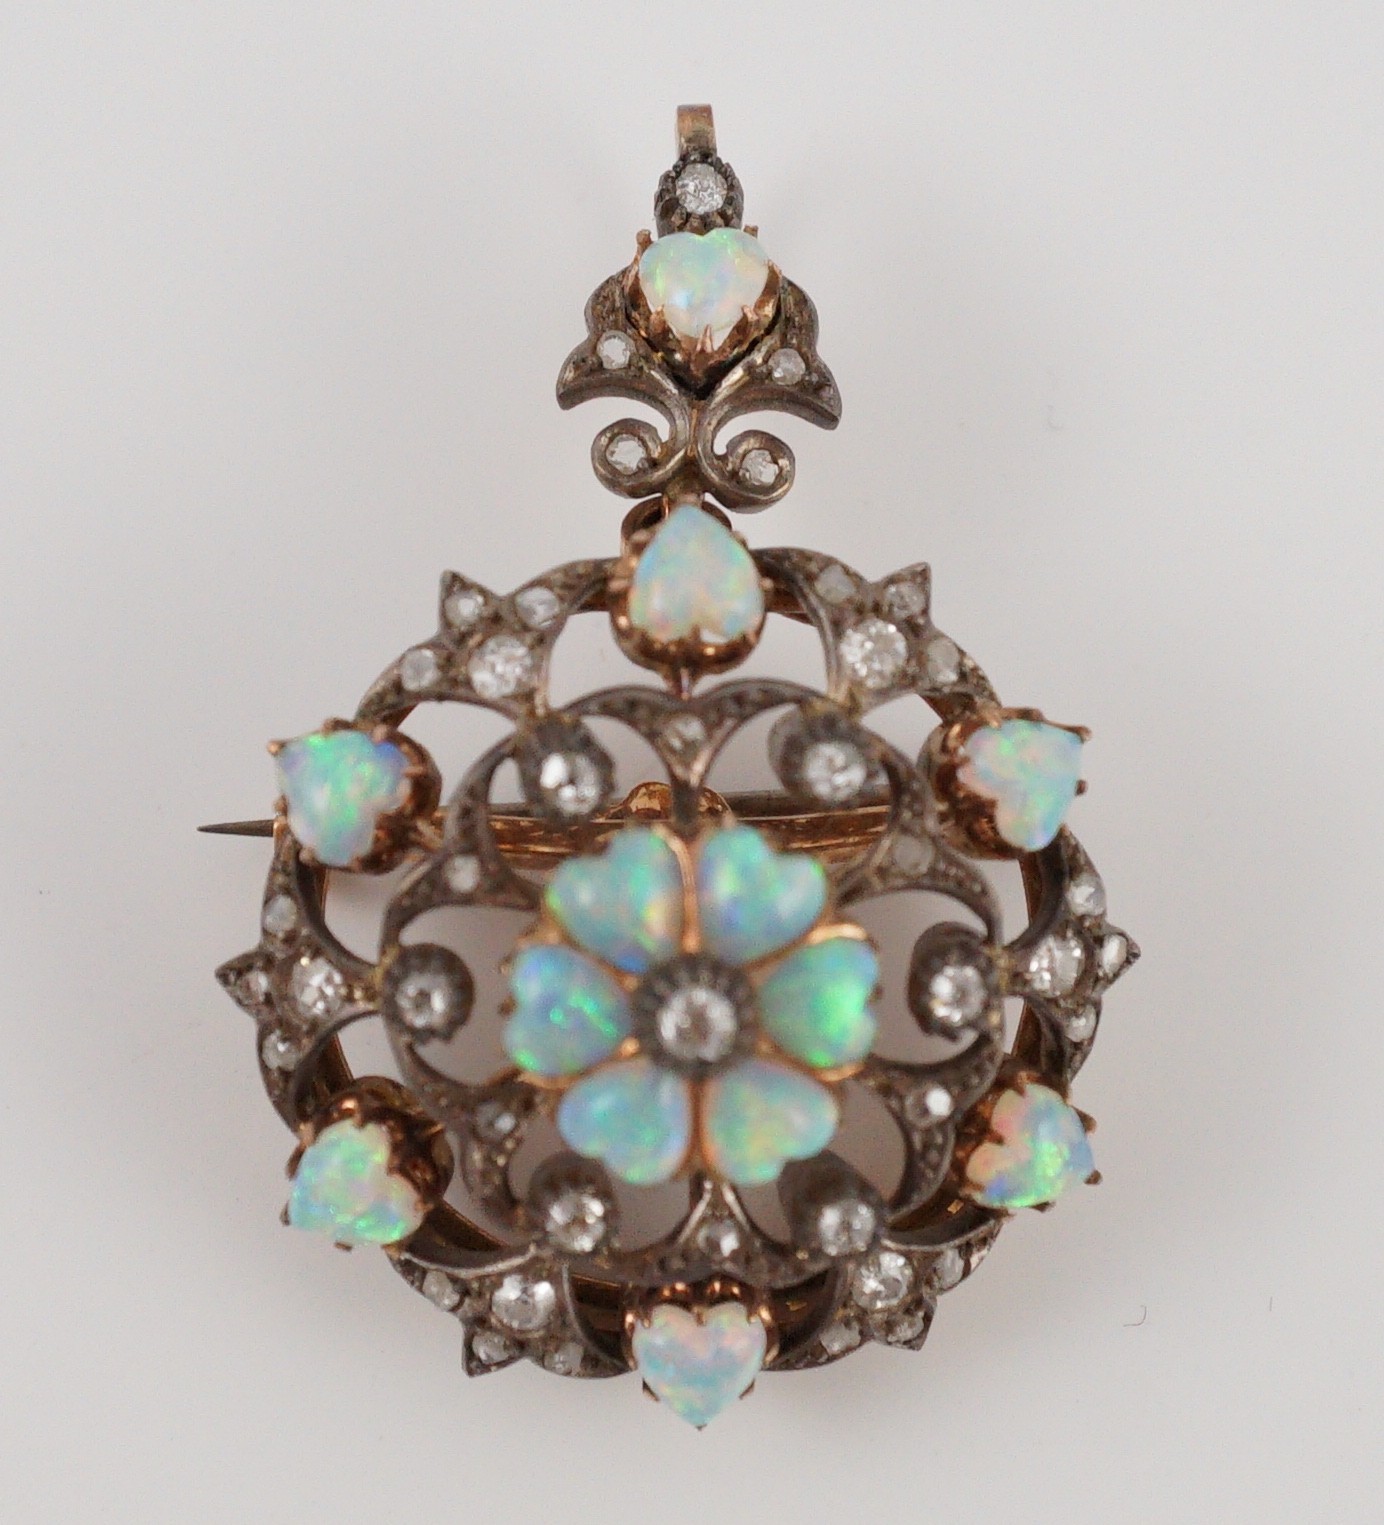 A late Victorian gold silver and diamond circular cluster pendant brooch, 3.5cm, gross 17.5 grams